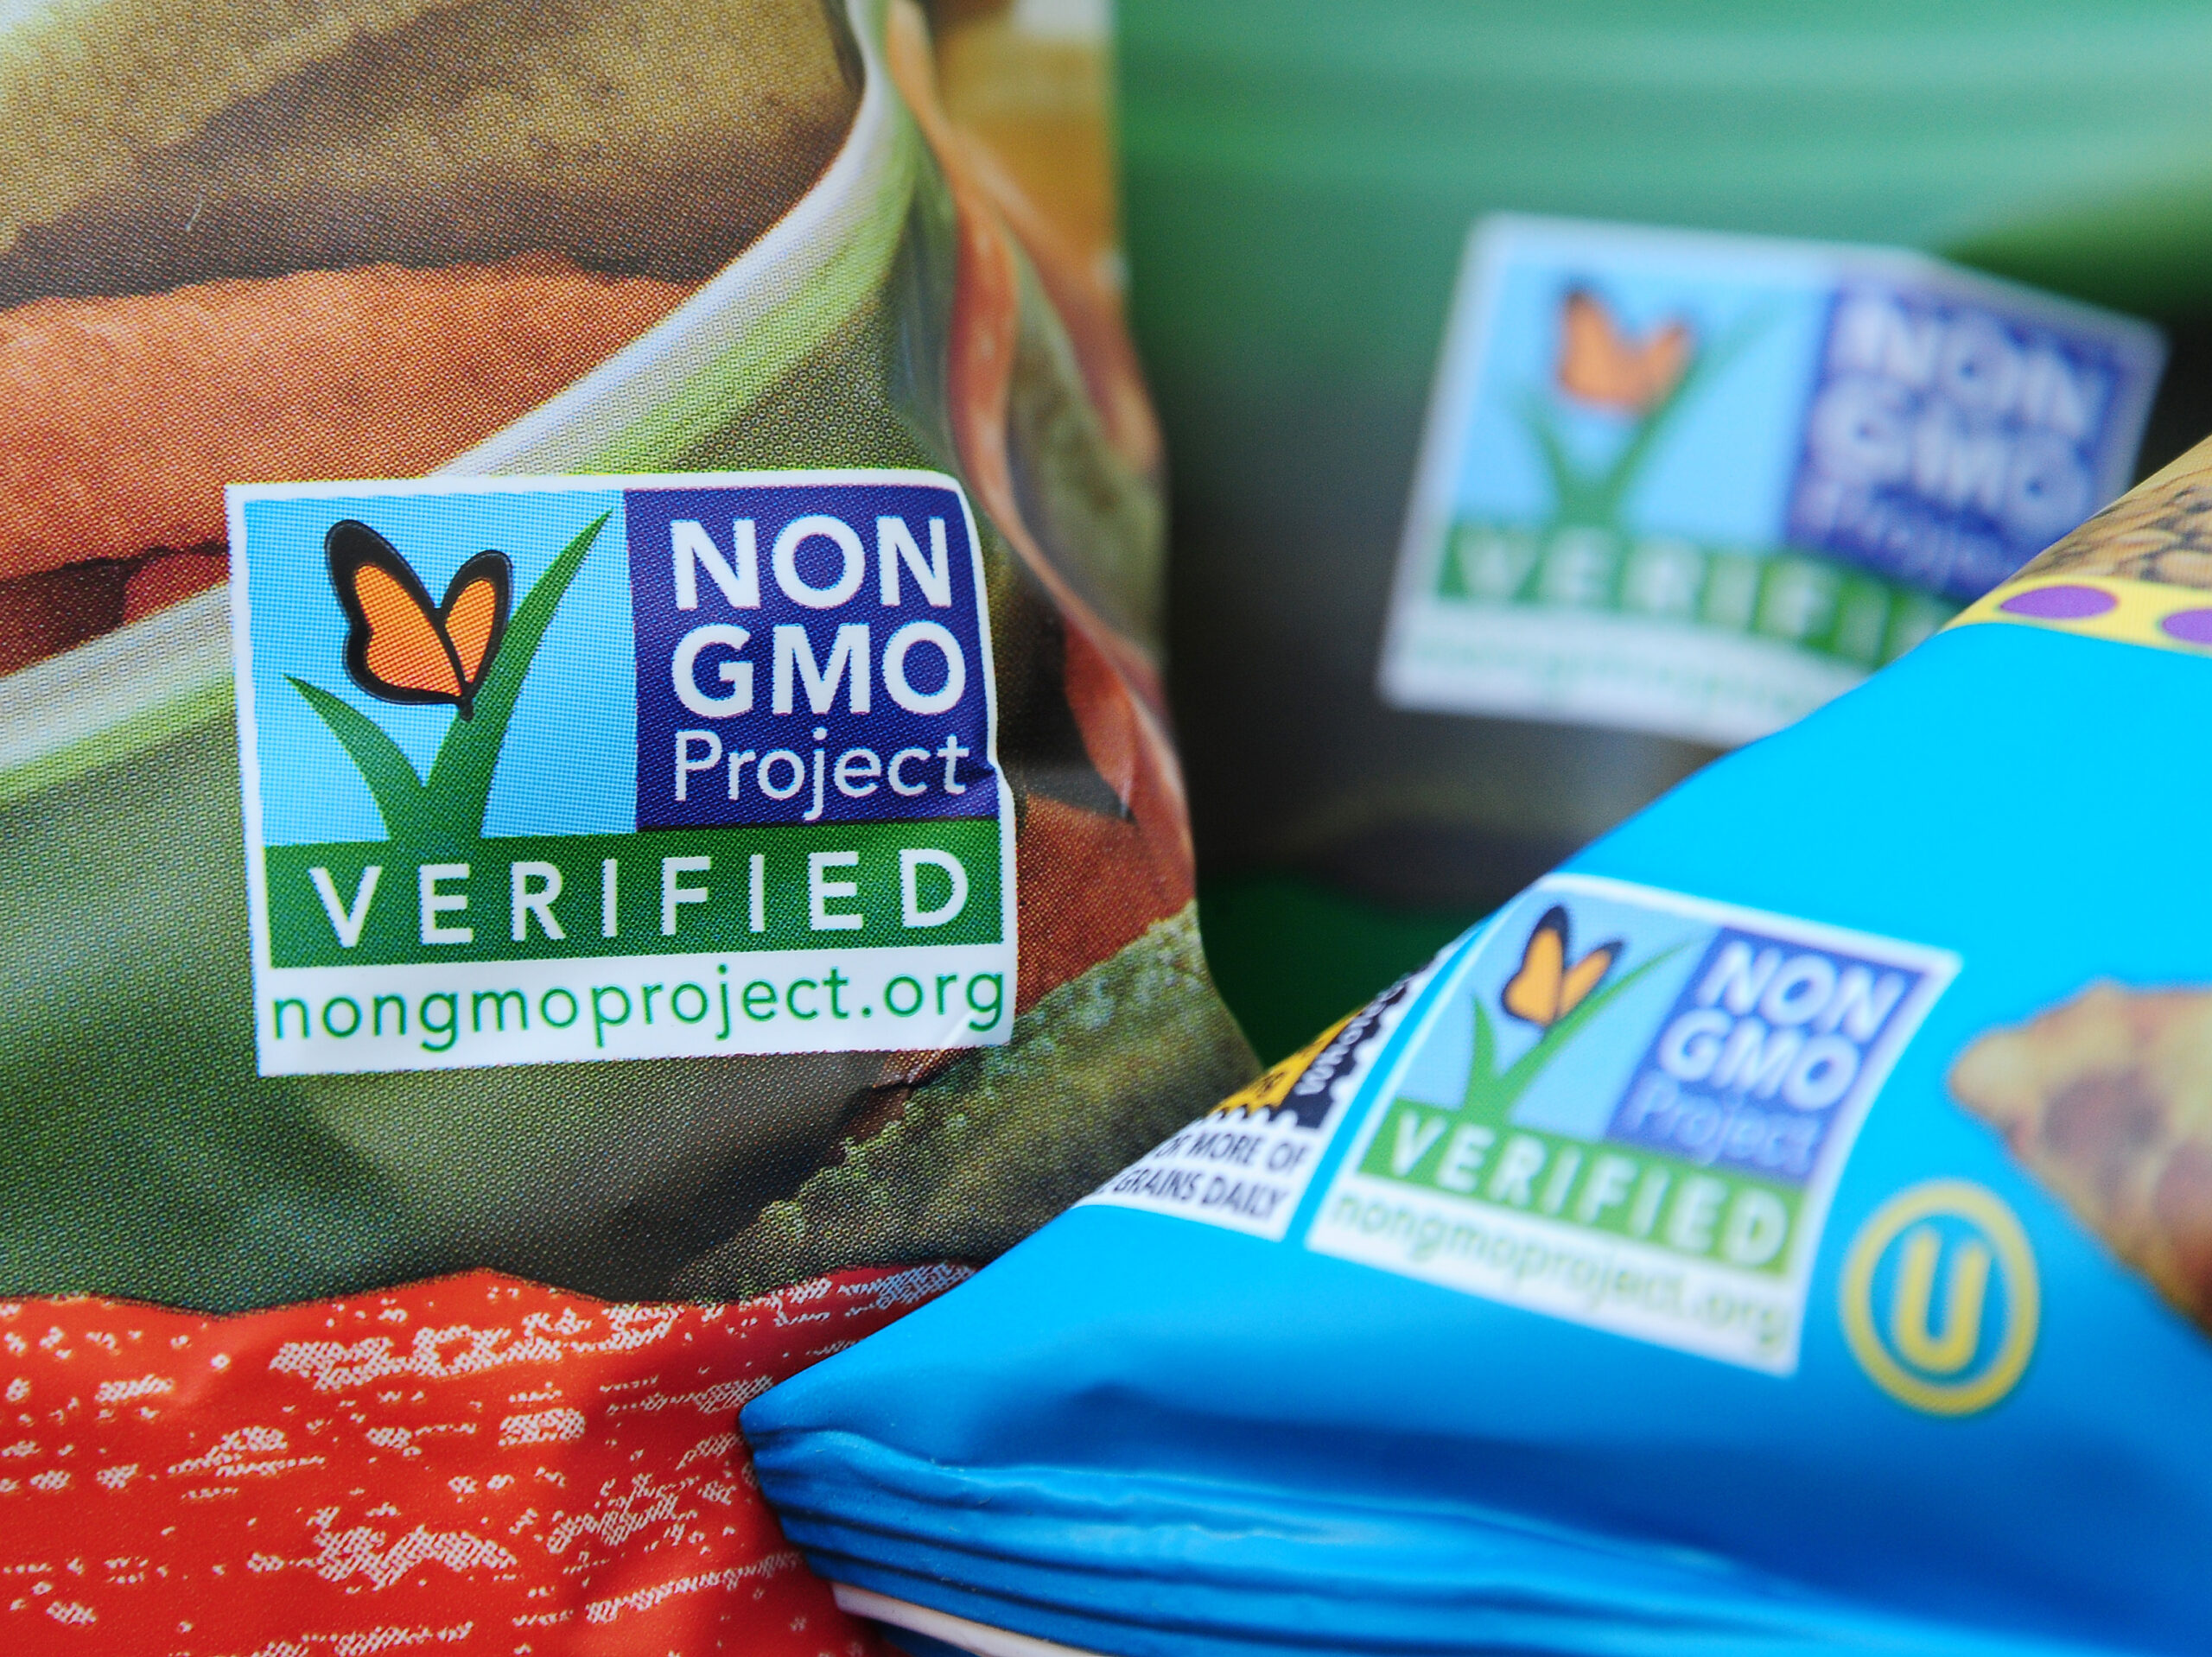 what does non-gmo mean